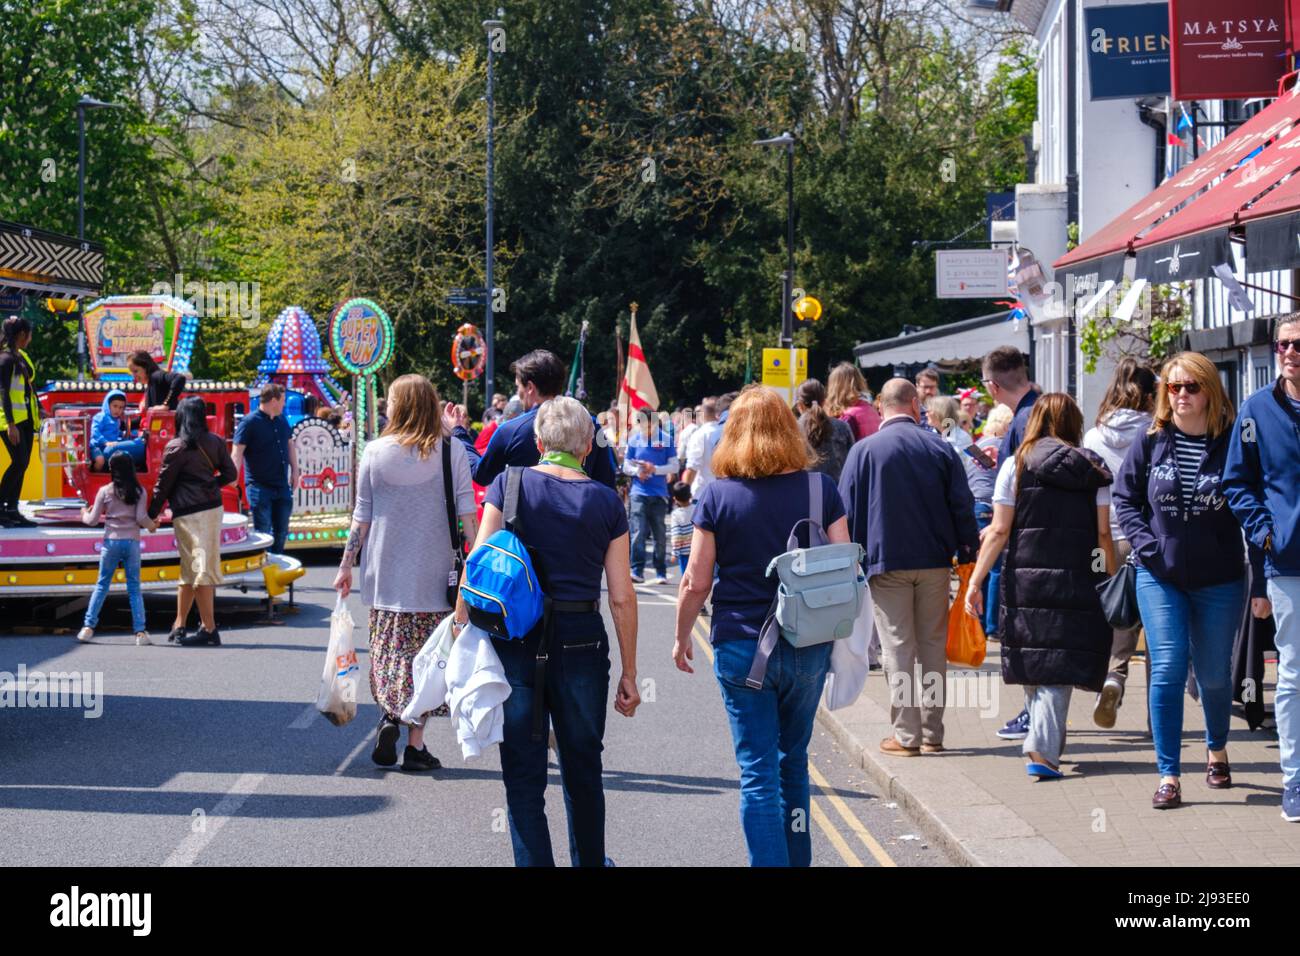 Children’s rides & people walking in street & pavement at 2022 St George’s Day Celebration. Pinner, Harrow, Greater London, England. Stock Photo